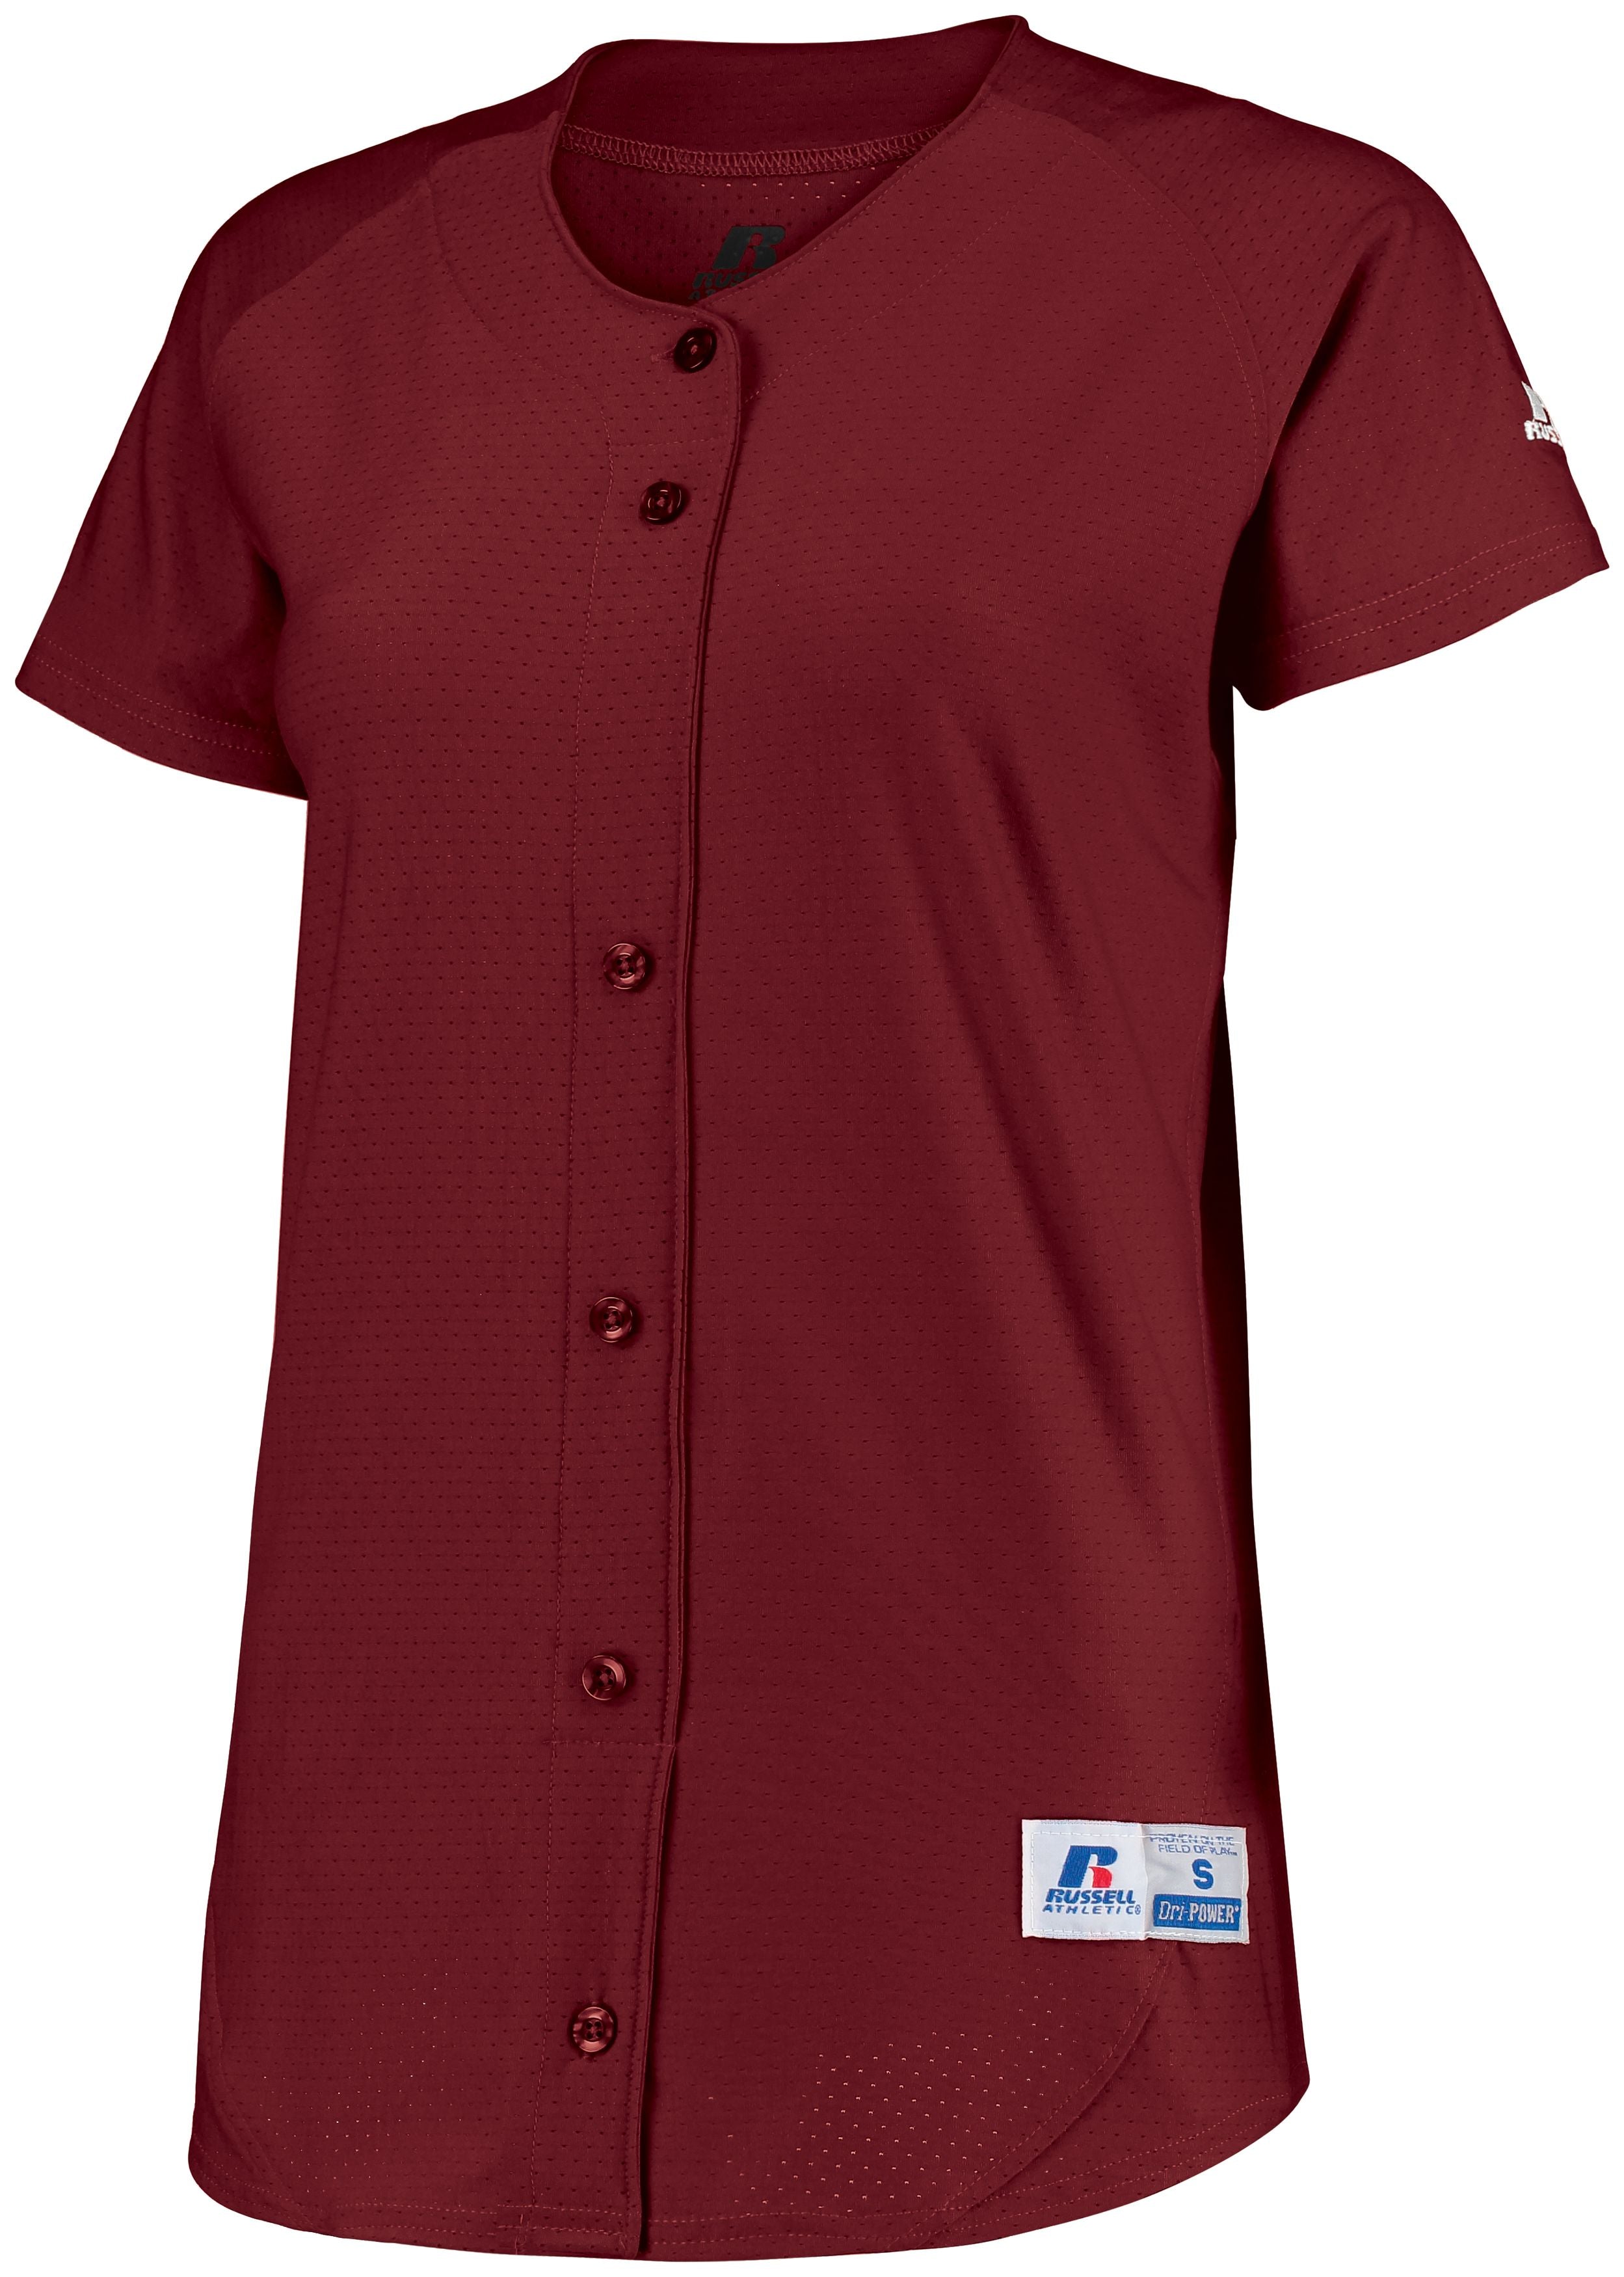 Russell Athletic Ladies Stretch Faux Button Jersey in Cardinal  -Part of the Ladies, Ladies-Jersey, Softball, Russell-Athletic-Products, Shirts product lines at KanaleyCreations.com